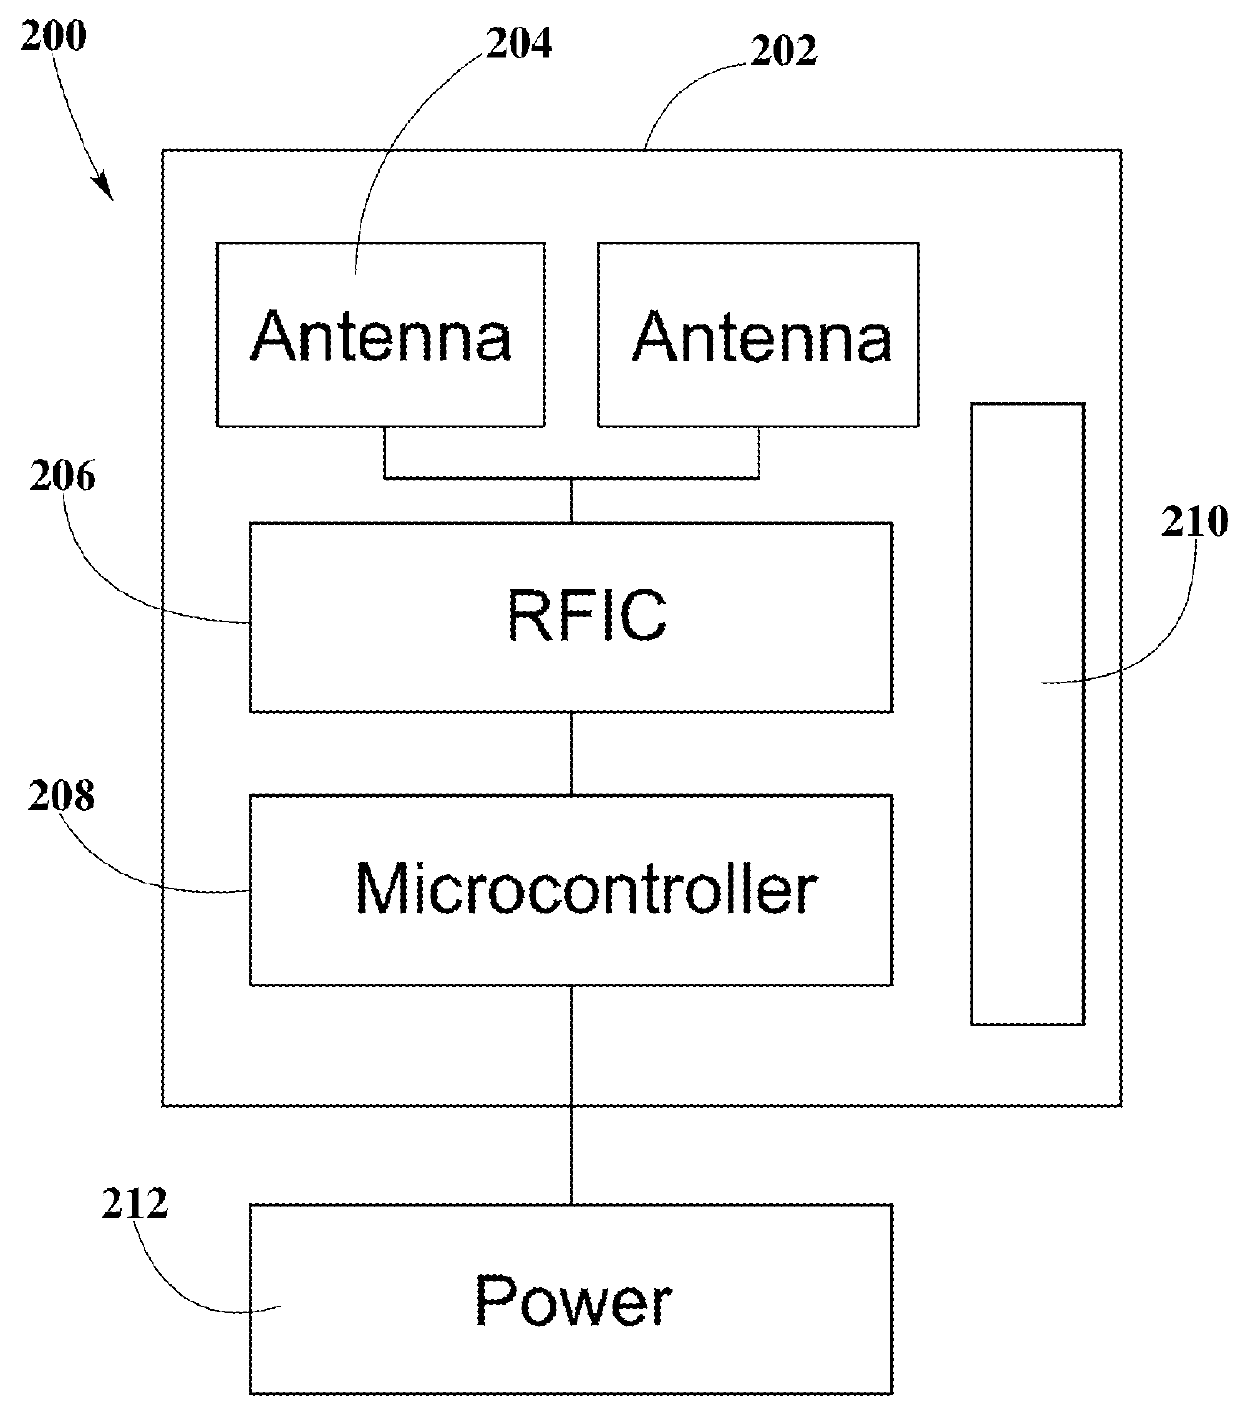 Systems and Methods for Tracking the Status and Usage Information of a Wireless Power Transmission System